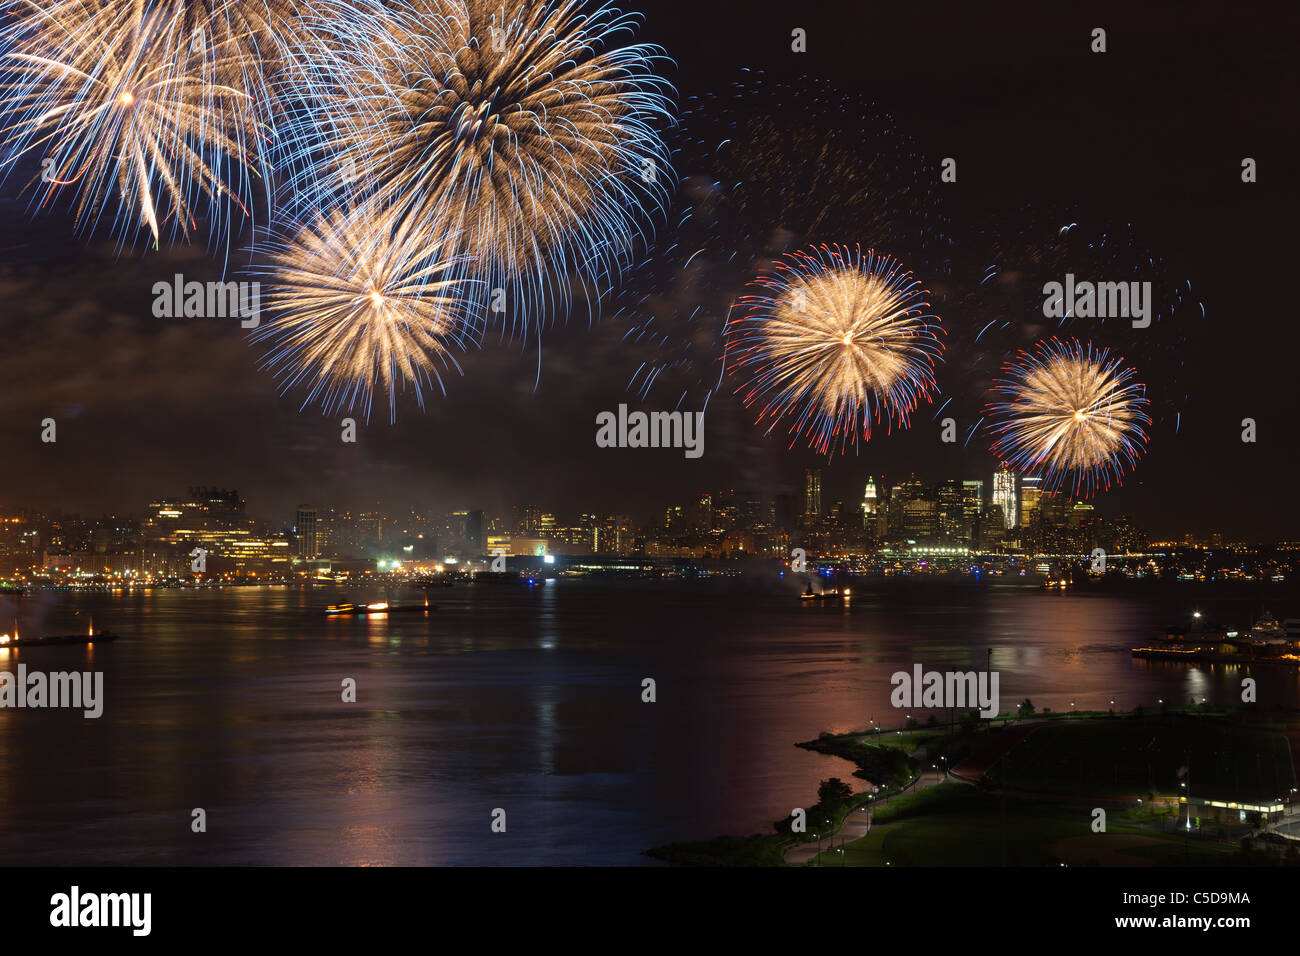 The Macy's 4th of July fireworks show lights the sky over Hudson River in New York City. Stock Photo